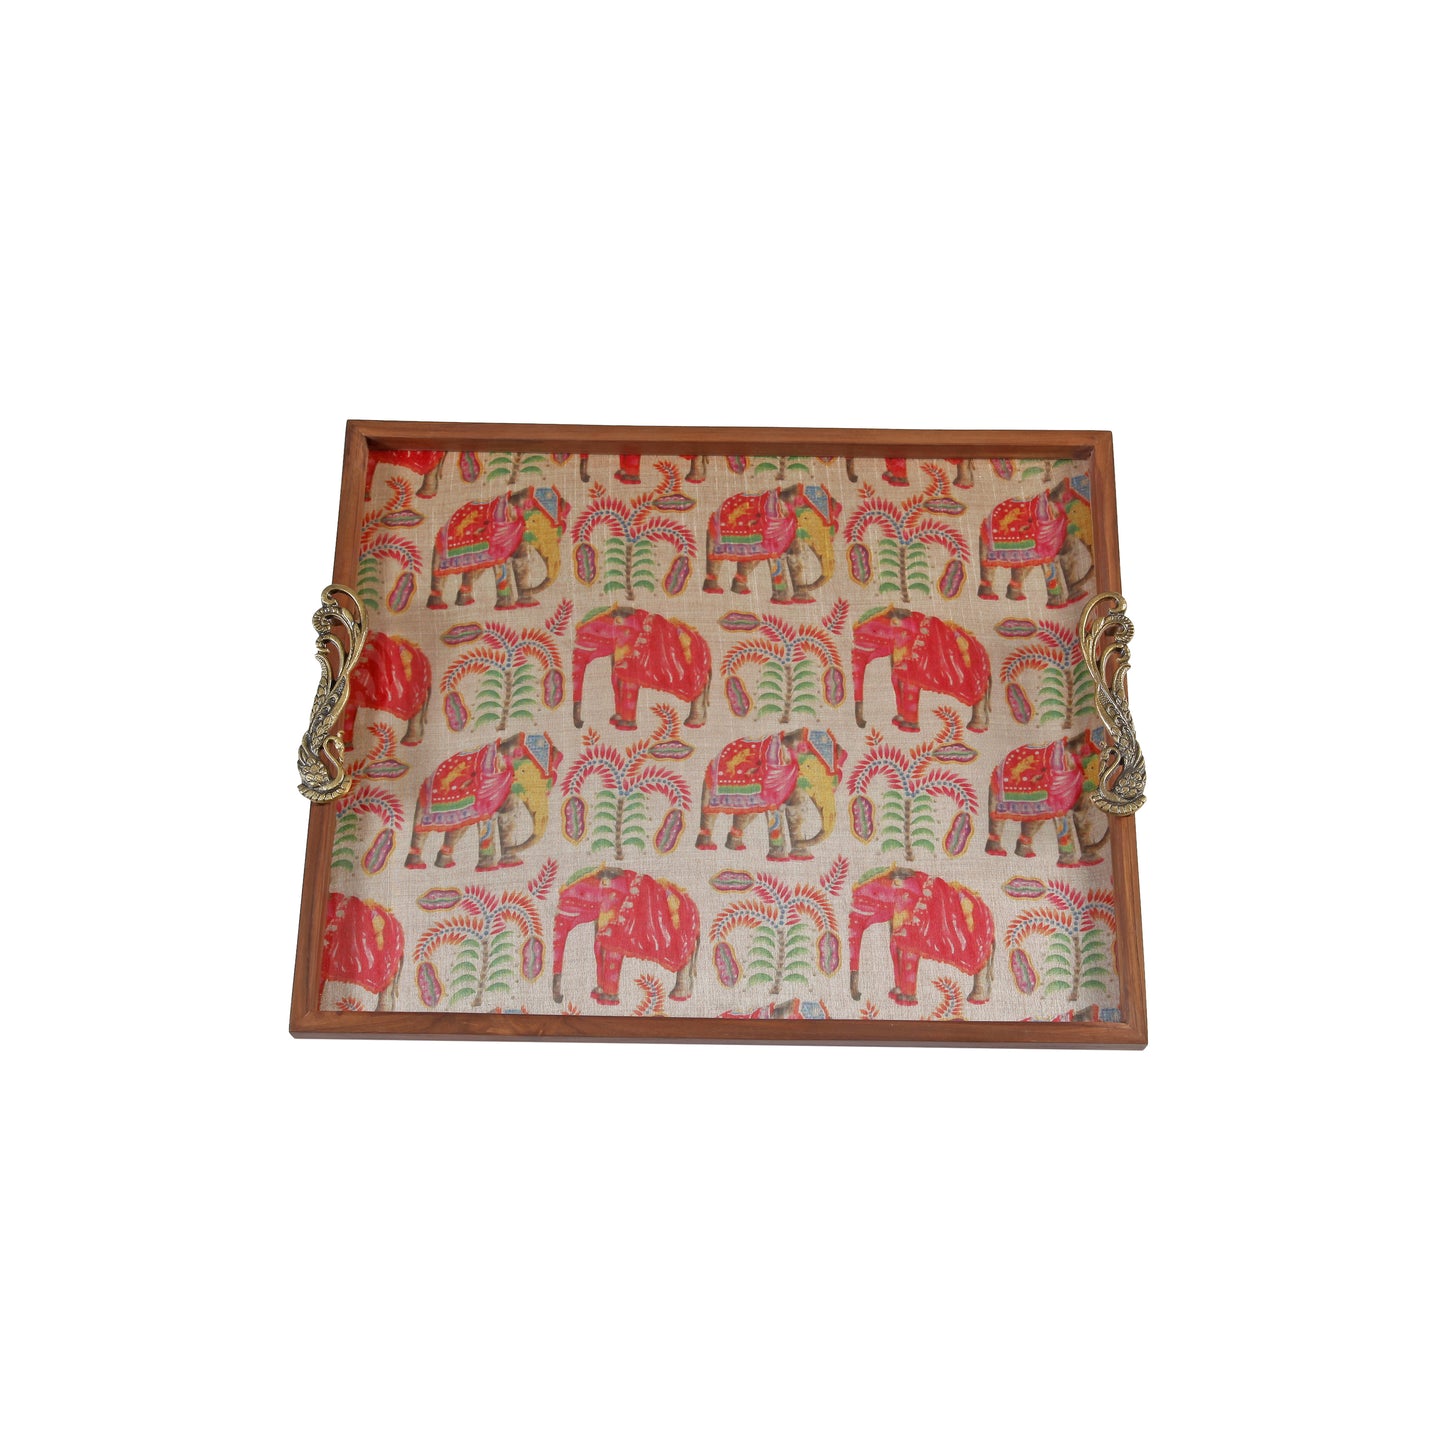 A Tiny Mistake Multicolour Elephant Print Teak Tray with Brass Handle Big Serving Tray